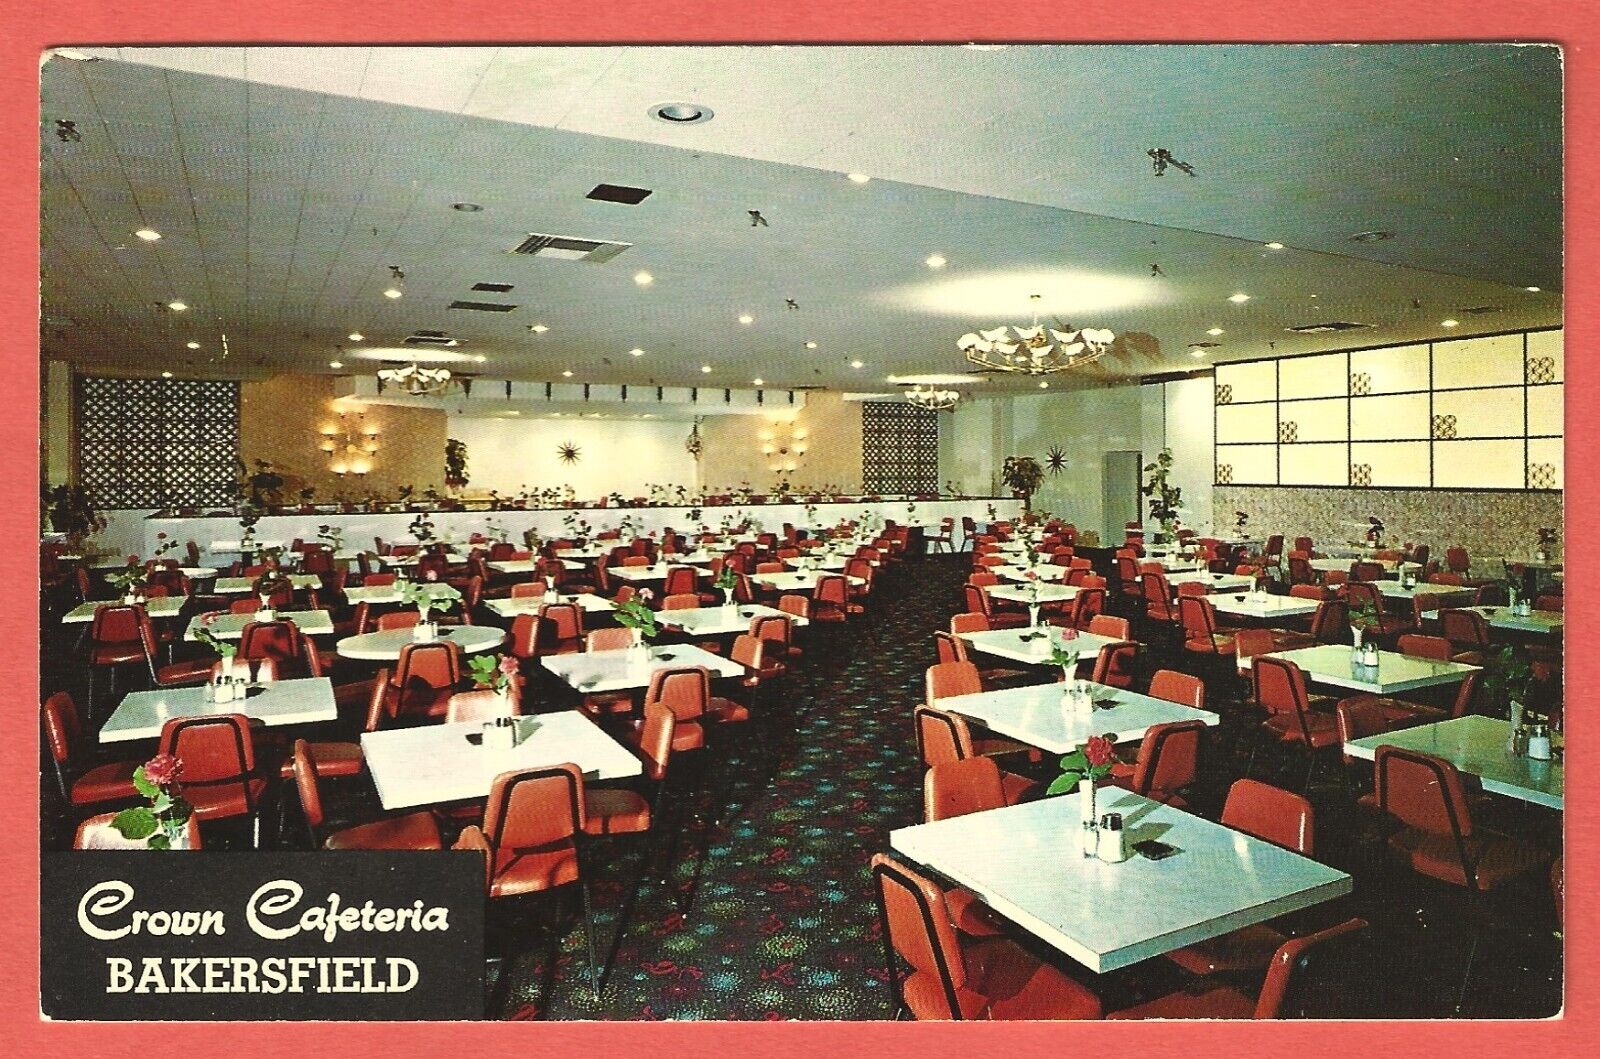 CROWN CAFETERIA, 1616 30th STREET, BAKERSFIELD, CALIF. – Closed - 1950s Postcard